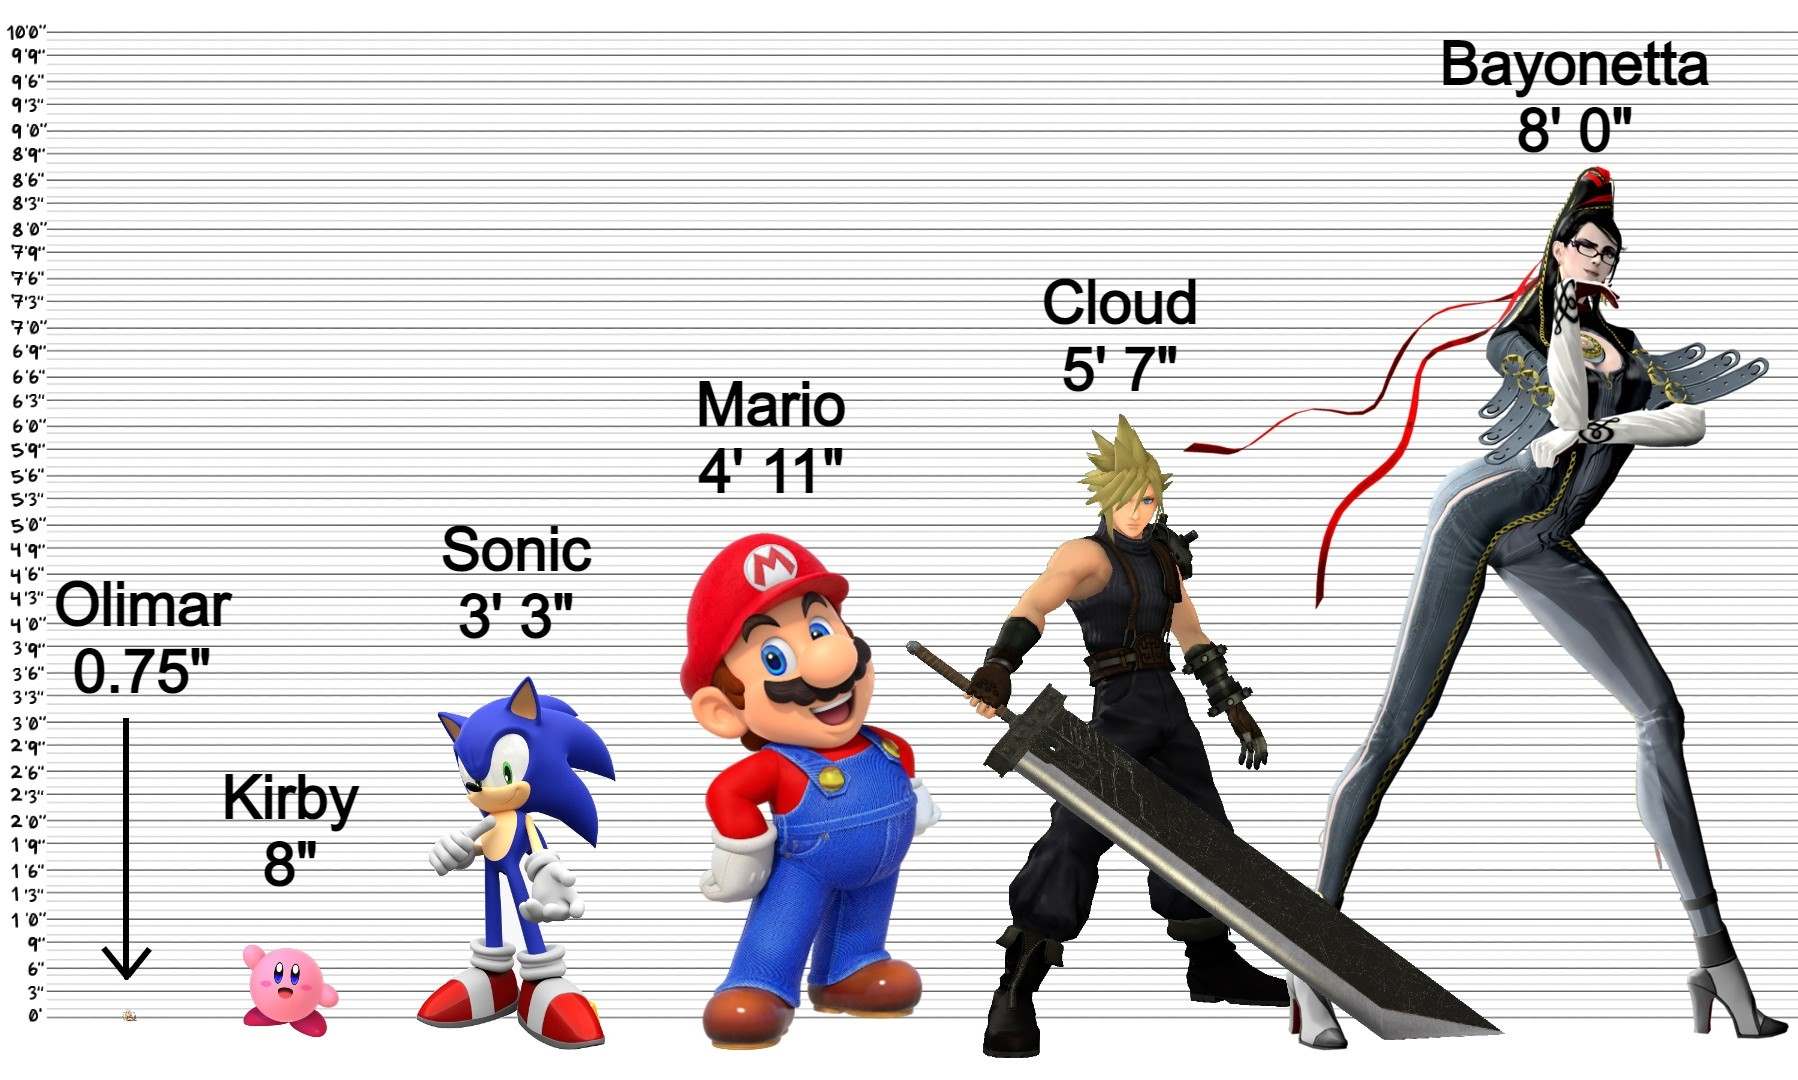 The Heights Of Mario And Other Smash Fighters Revealed! Prepare To Be Surprised!